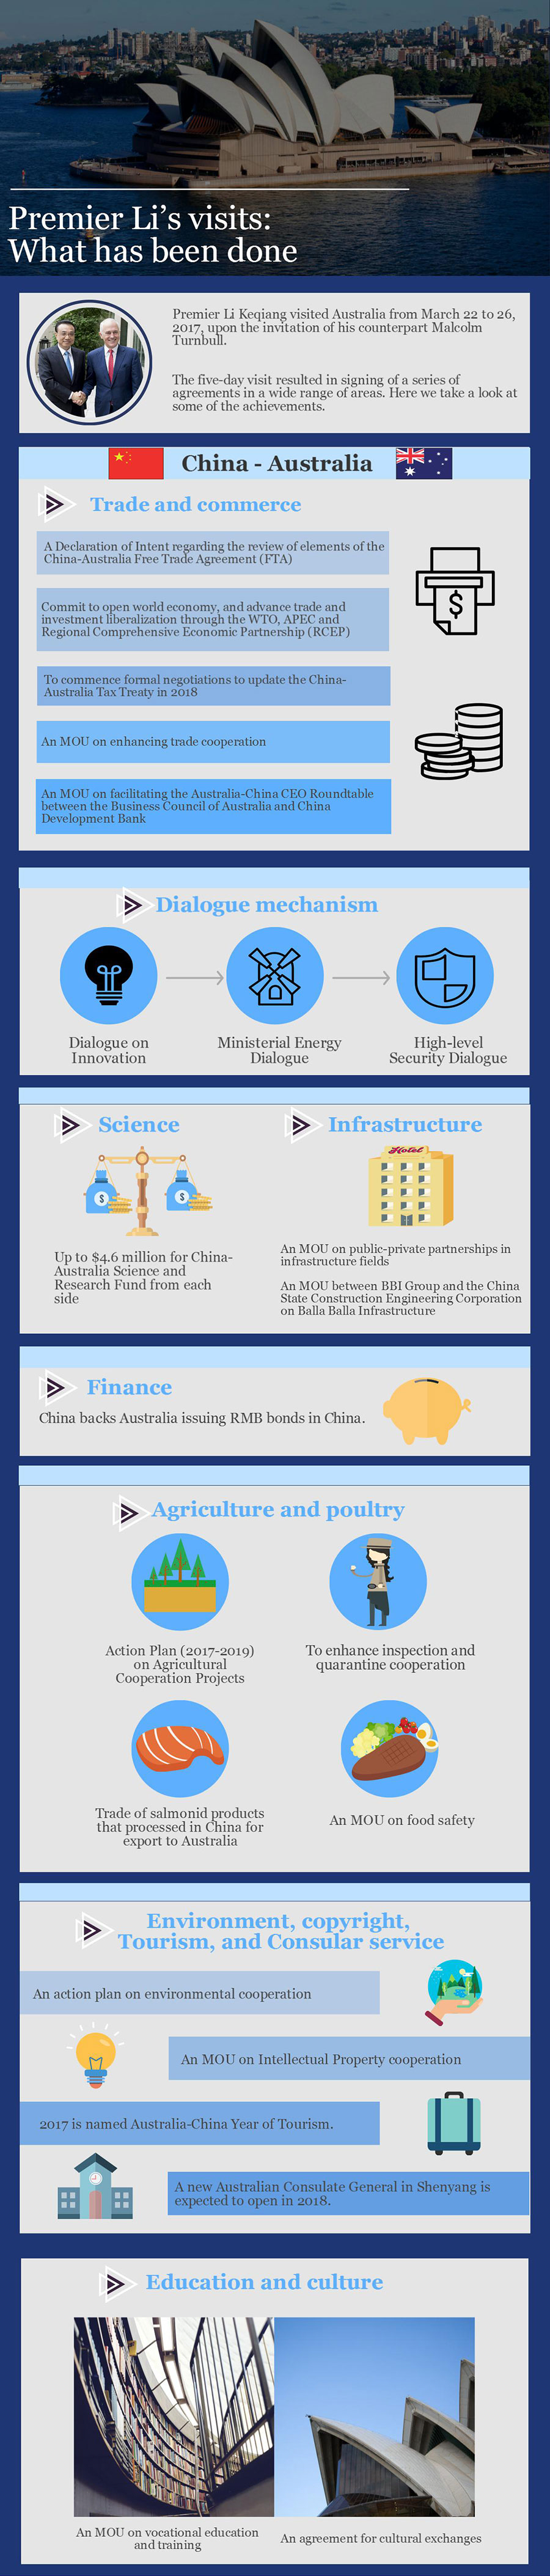 Premier Li's visits: What has been done